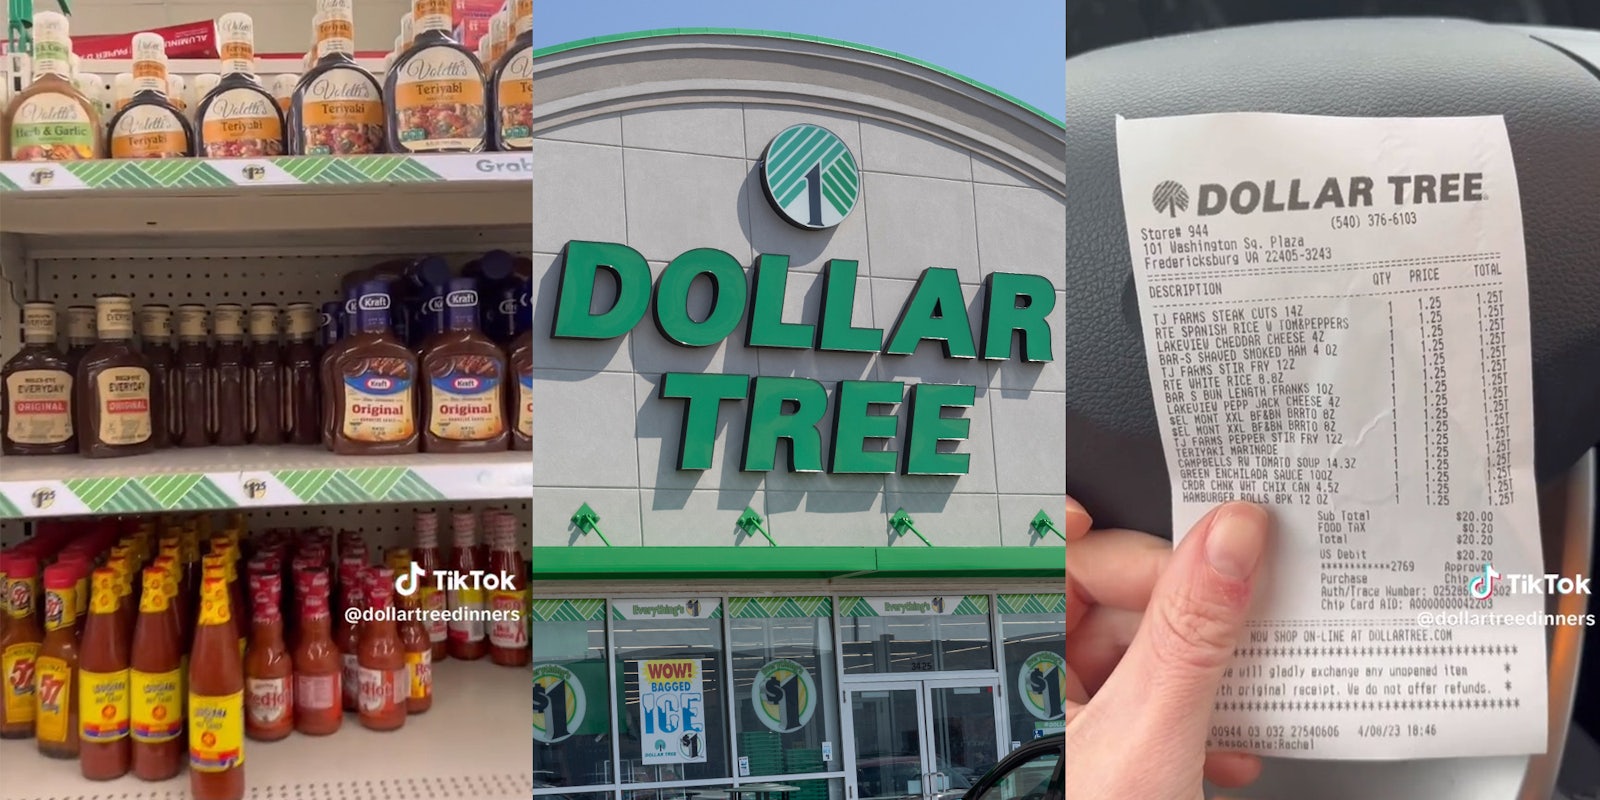 Customer cooks 4 dinners out of $20 Dollar Tree grocery haul